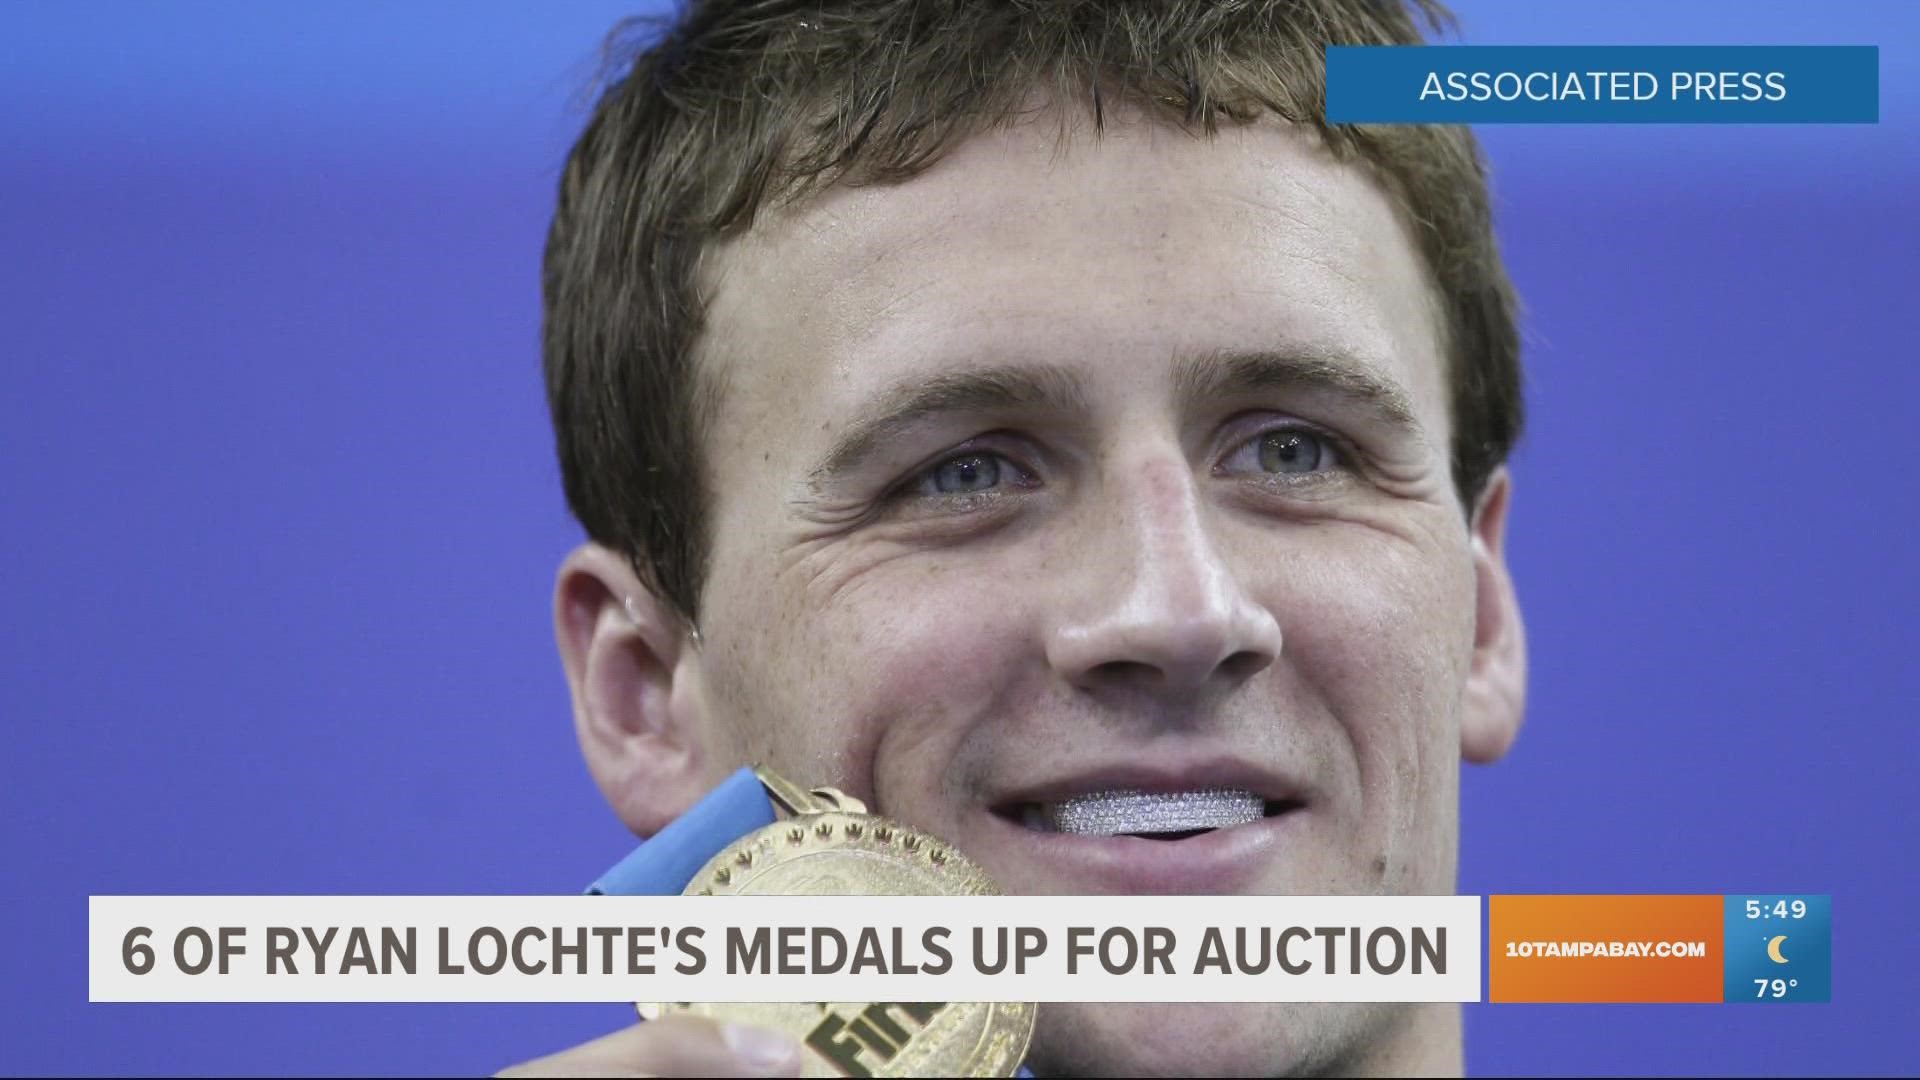 The 37-year-old swimmer earned 12 medals over four Olympics, including six gold that he plans to keep for now.